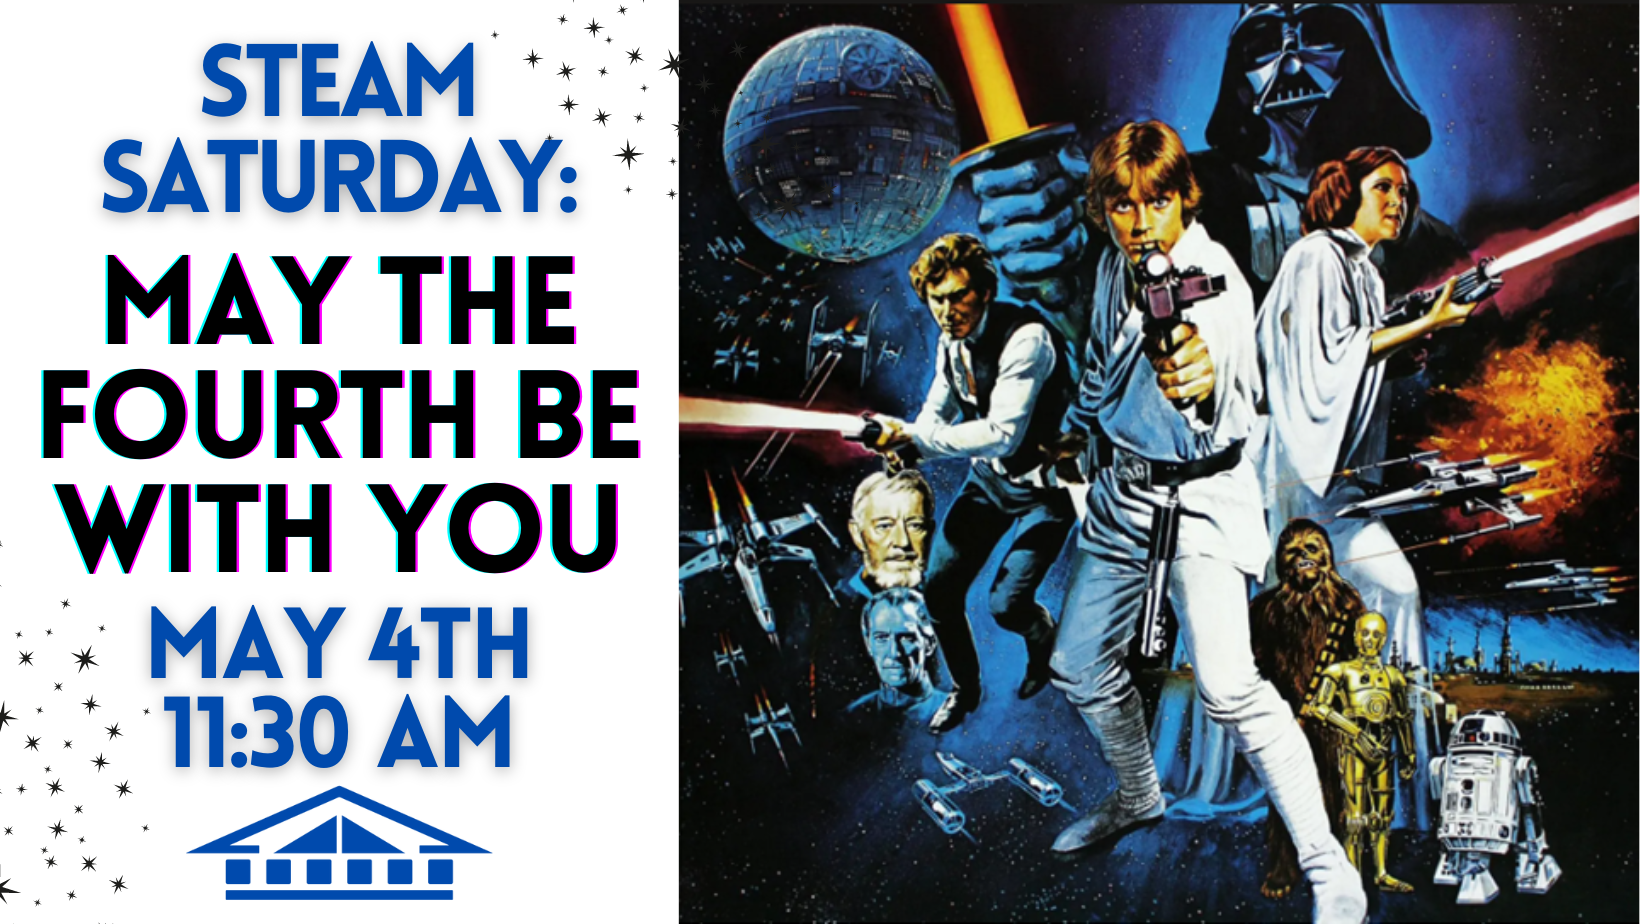 STEAM Saturday: May the Fourth Be With You!